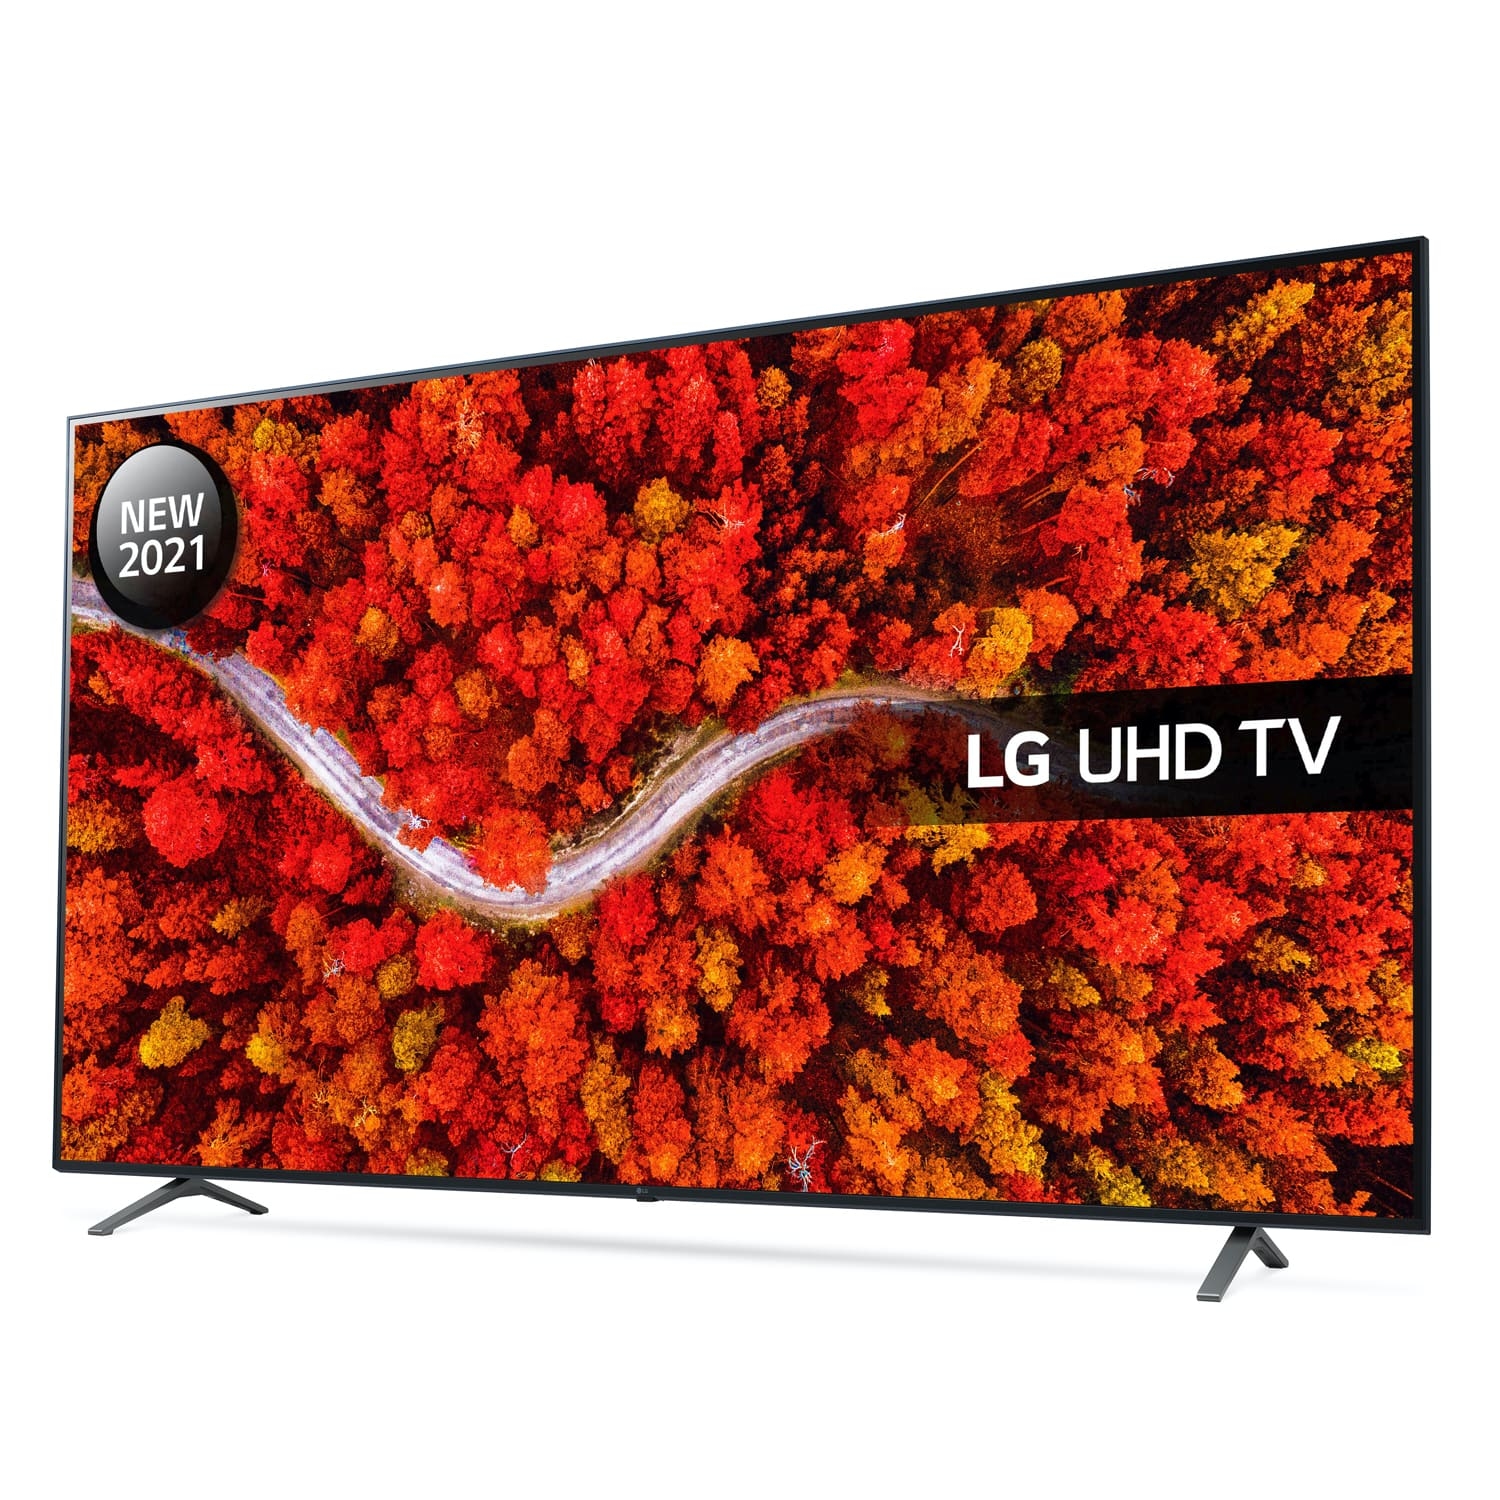 LG 82UP80006LA 82" 4K UHD LED Smart TV with Freeview Play - 8